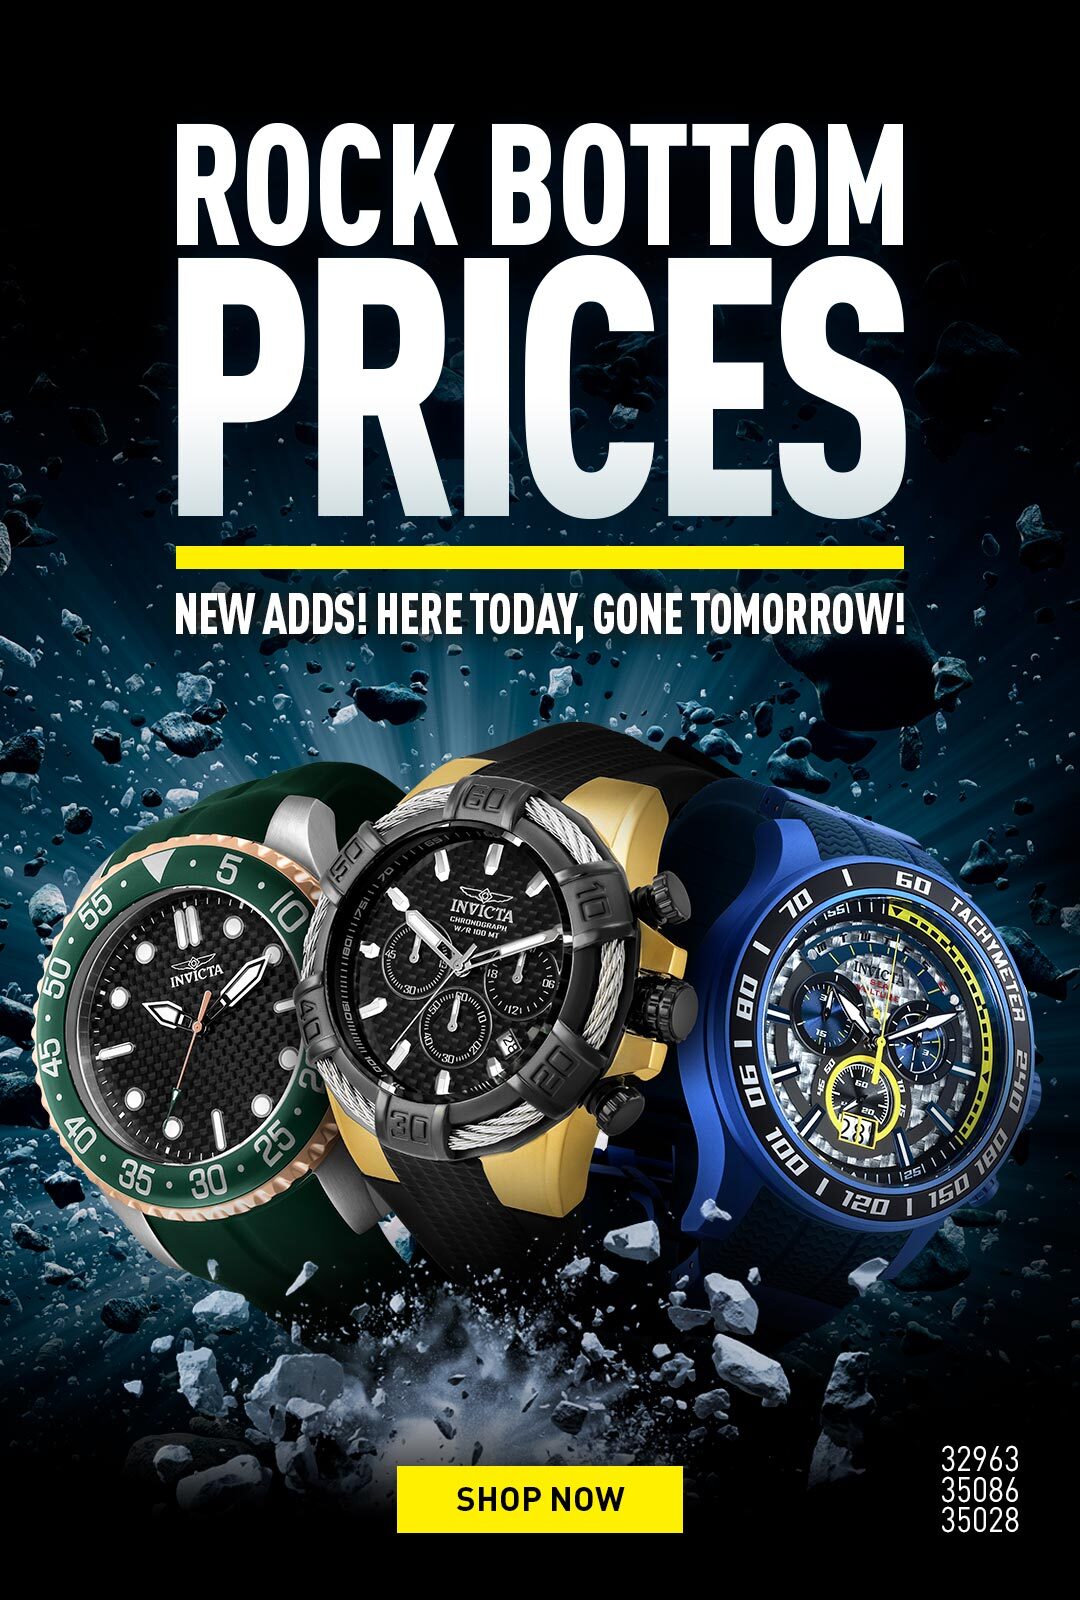 Rock bottom prices. New adds! here today, gone tomorrow!